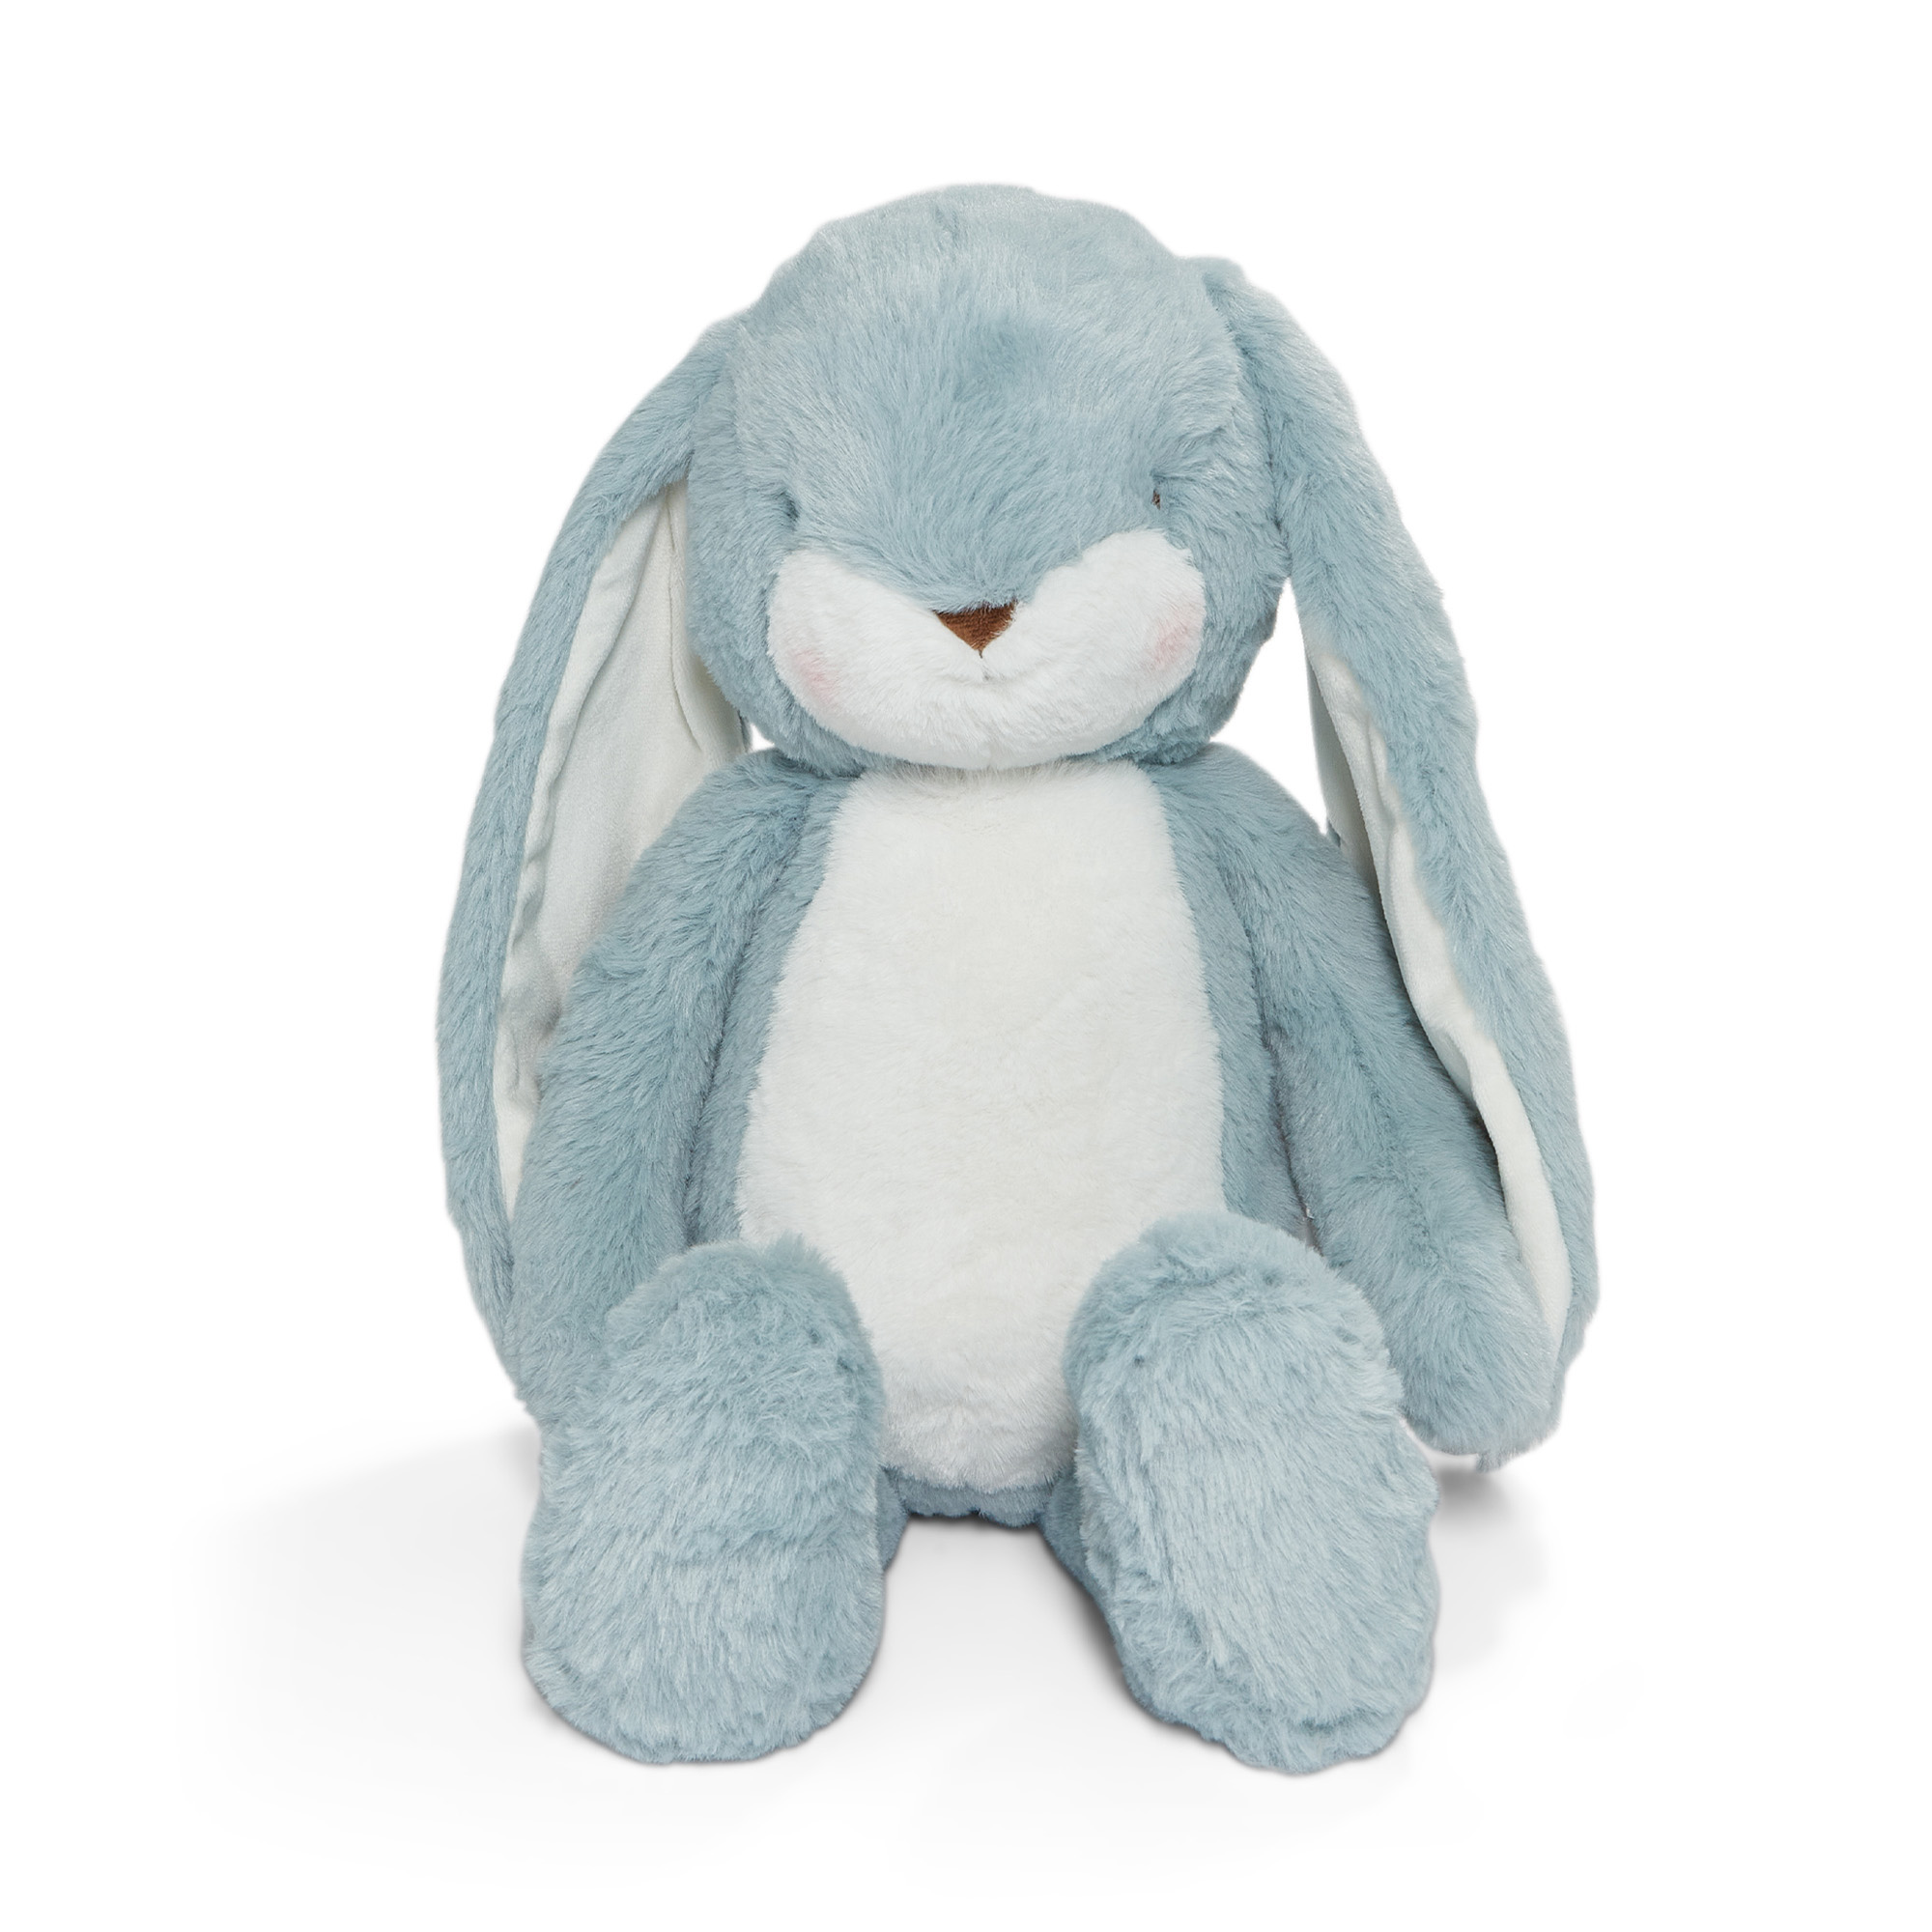 Peluche Big Nibble Floppy Stormy Blue 50 cm - Bunnies By The Bay